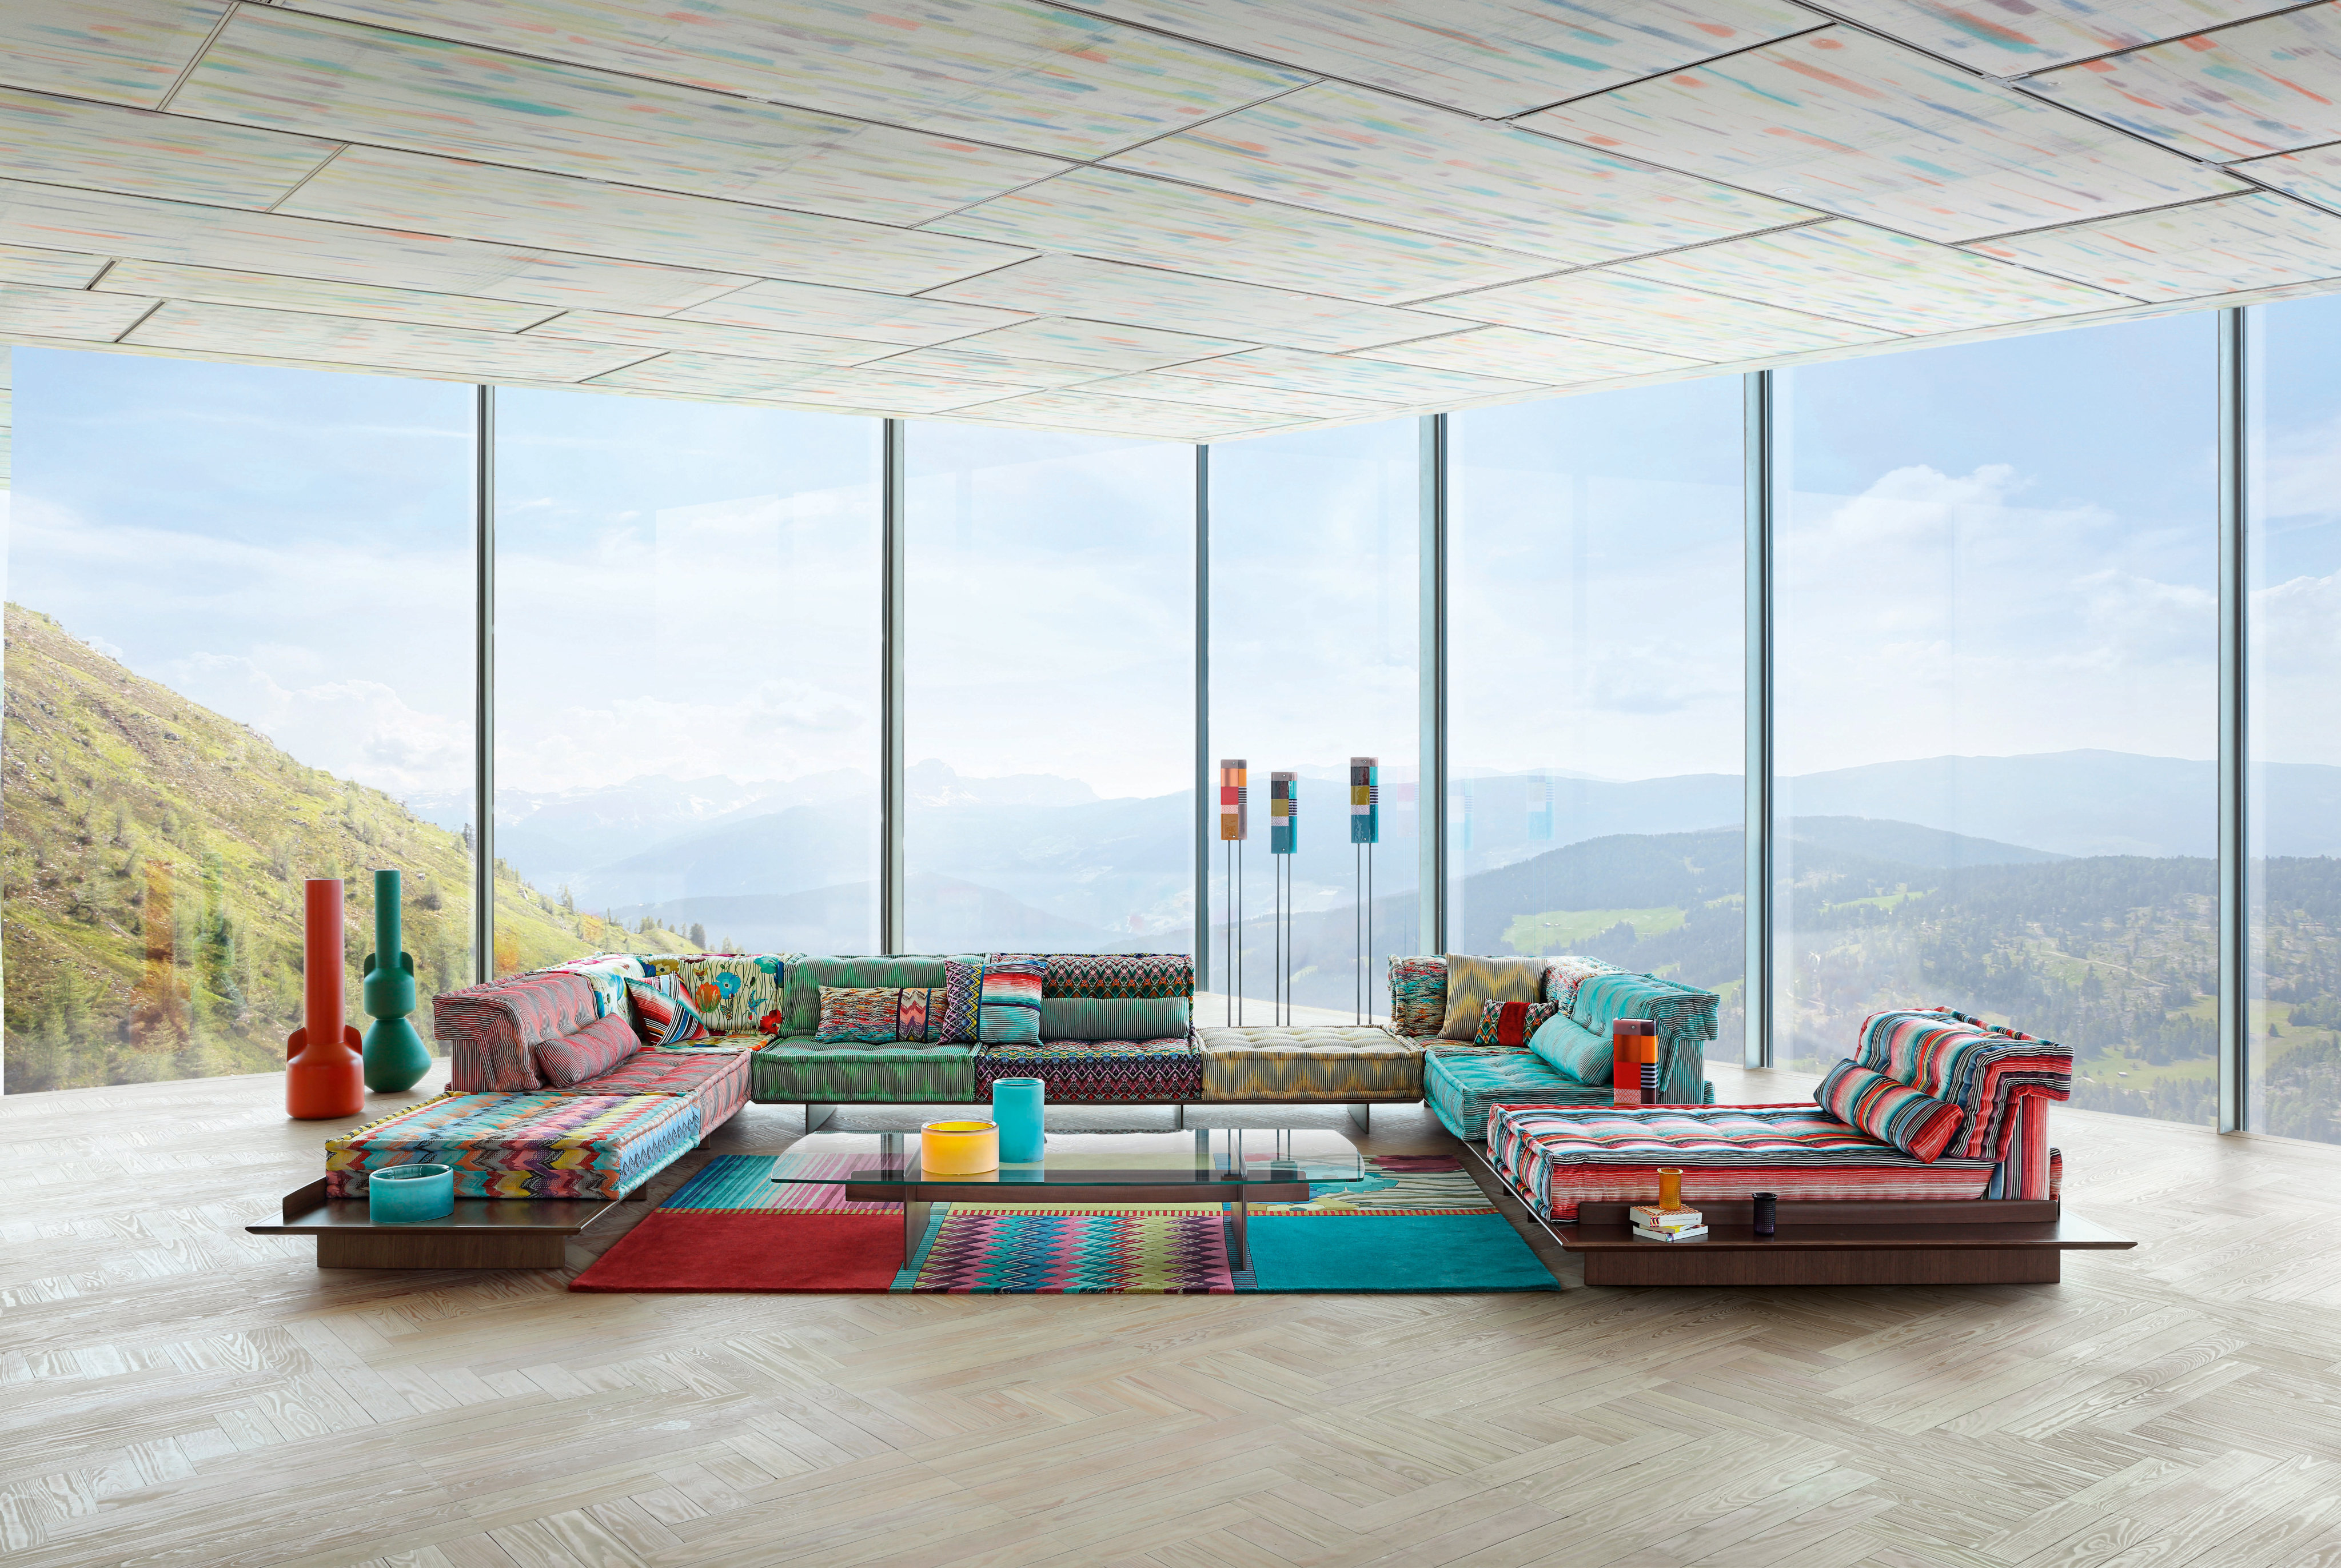 Supersalone, a special edition of the Milan Furniture Fair, showcased next year’s homeware fashions with all the big brands represented including Bulgari, Dior, Gucci and Hermès, as well as these pieces from Roche Bobois. Photo: Roche Bobois